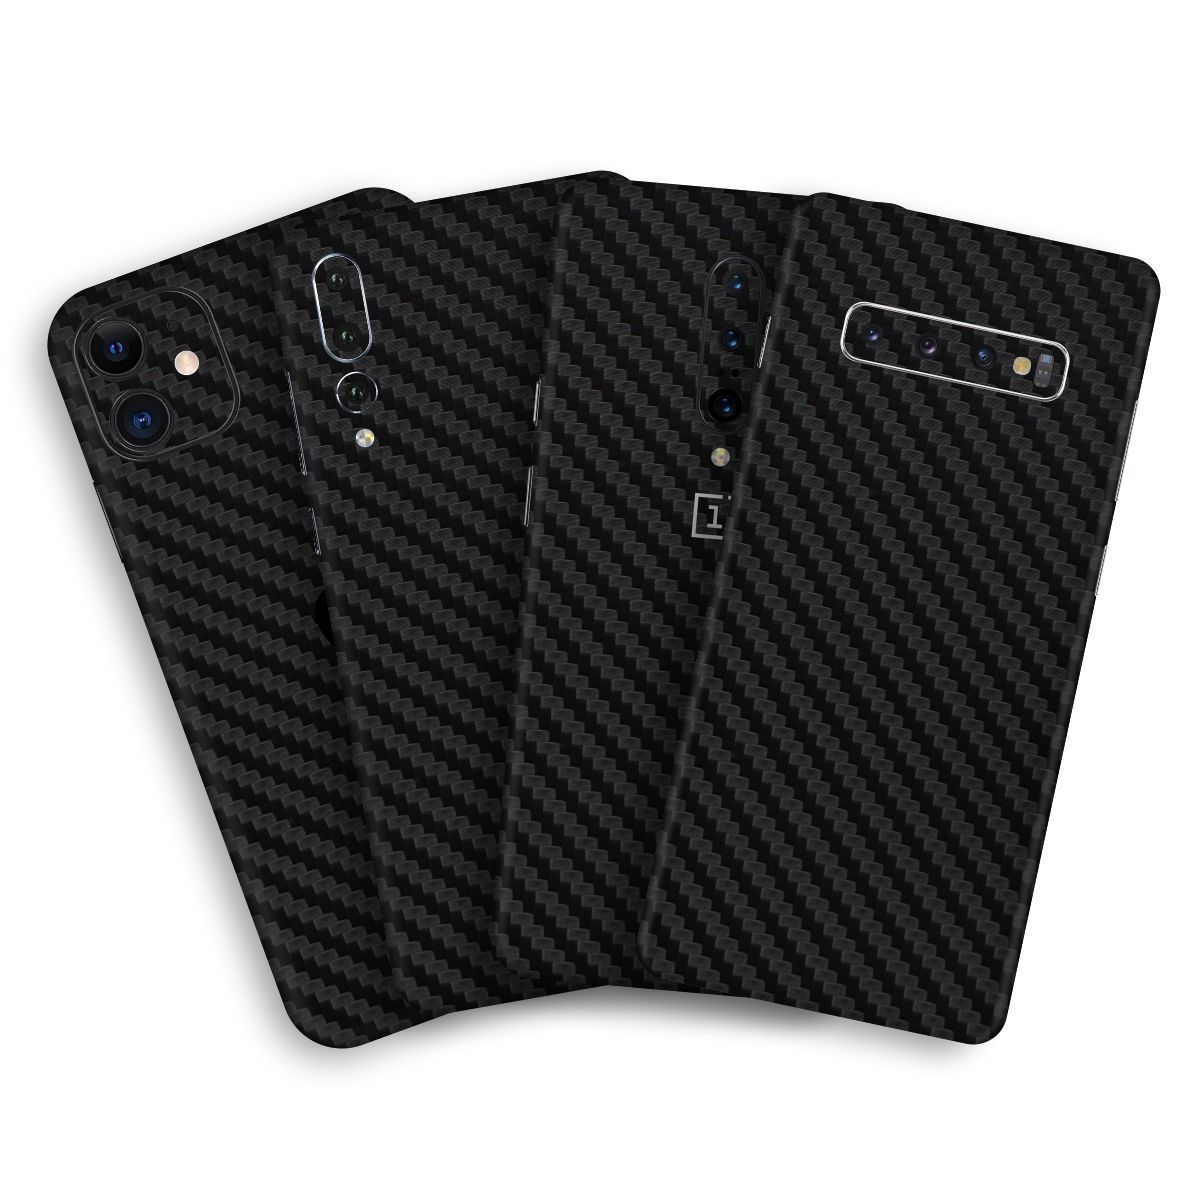 Black Carbon Mobile Skin / Mobile Wrap for Samsung Galaxy S7